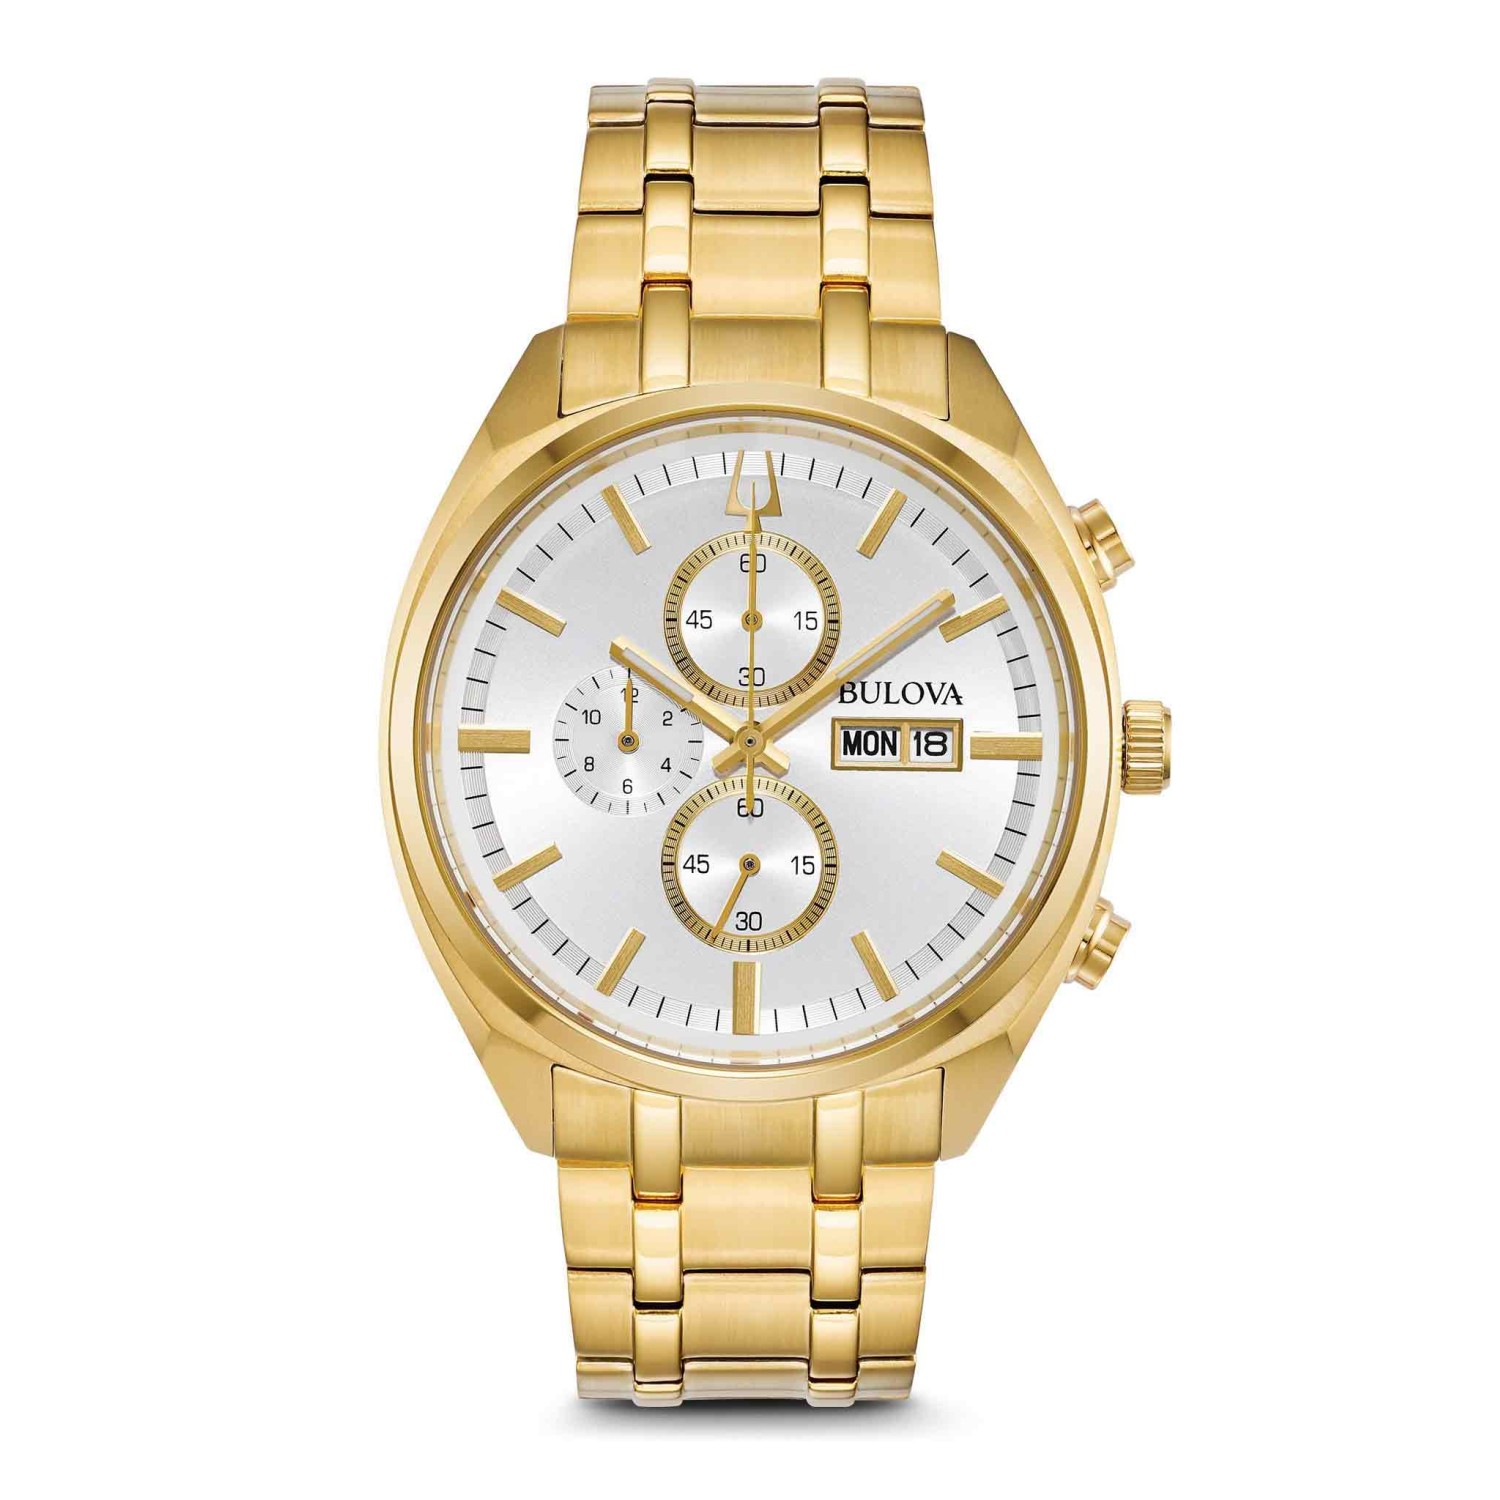 97C109 Bulova Mens Surveyor Chronograph Watch. Heritage-inspired quartz chronograph with gold-tone stainless steel case, silver white six-hand dial with day/date feature, domed mineral crystal, gold-tone stainless steel bracelet with short fold-over pushe